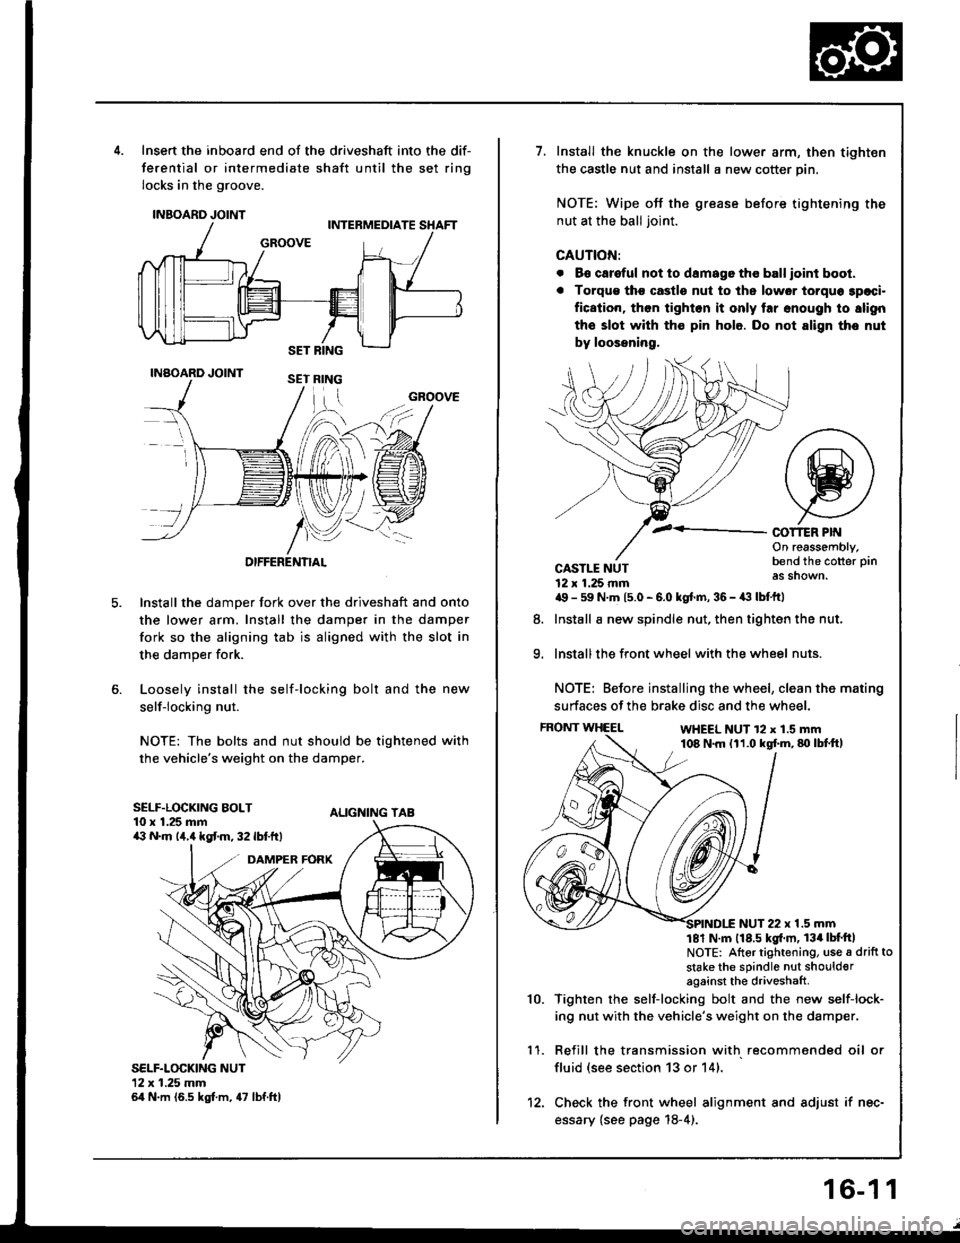 HONDA INTEGRA 1994 4.G Workshop Manual 5.
Insert the inboard end of the driveshaft into the dif-
ferential or intermediate shaft until the set ring
locks in the groove.
INBOARD JOINT
INAOARD JOINT
OIFFERENTIAL
Install the damper fork over 